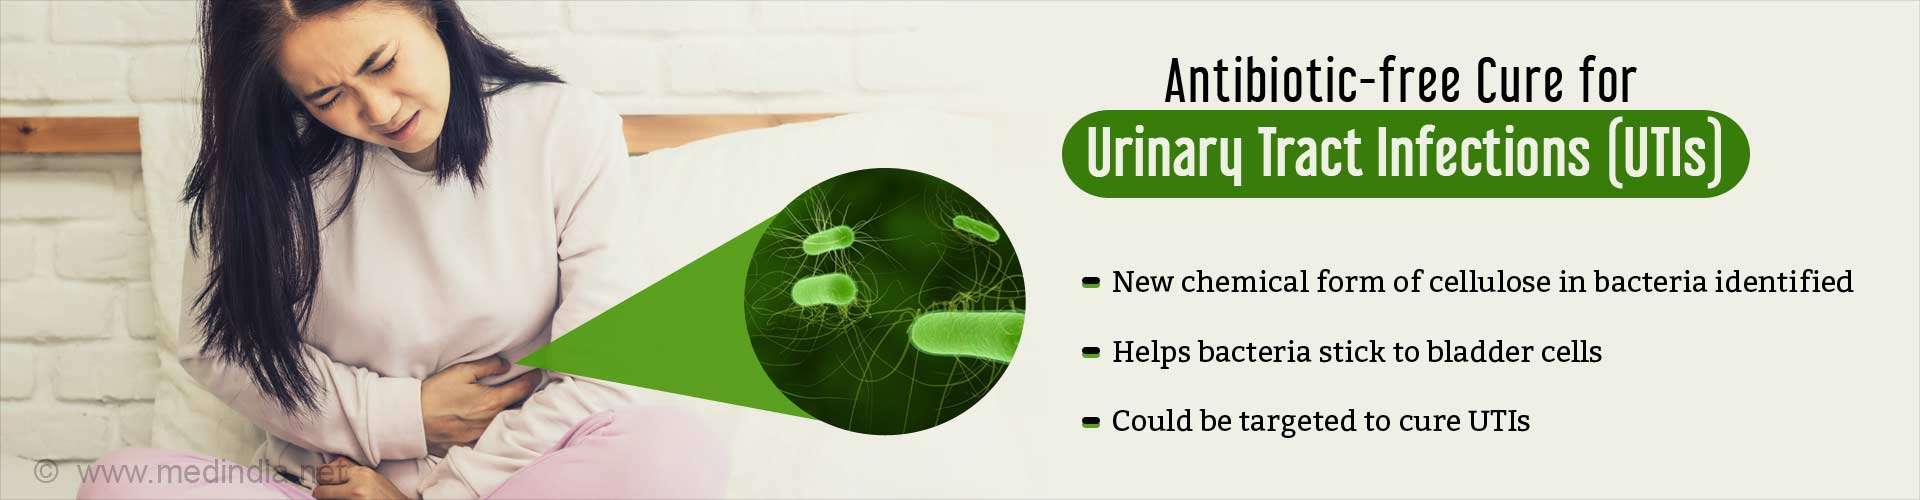 Treat Urinary Tract Infections Without Antibiotics